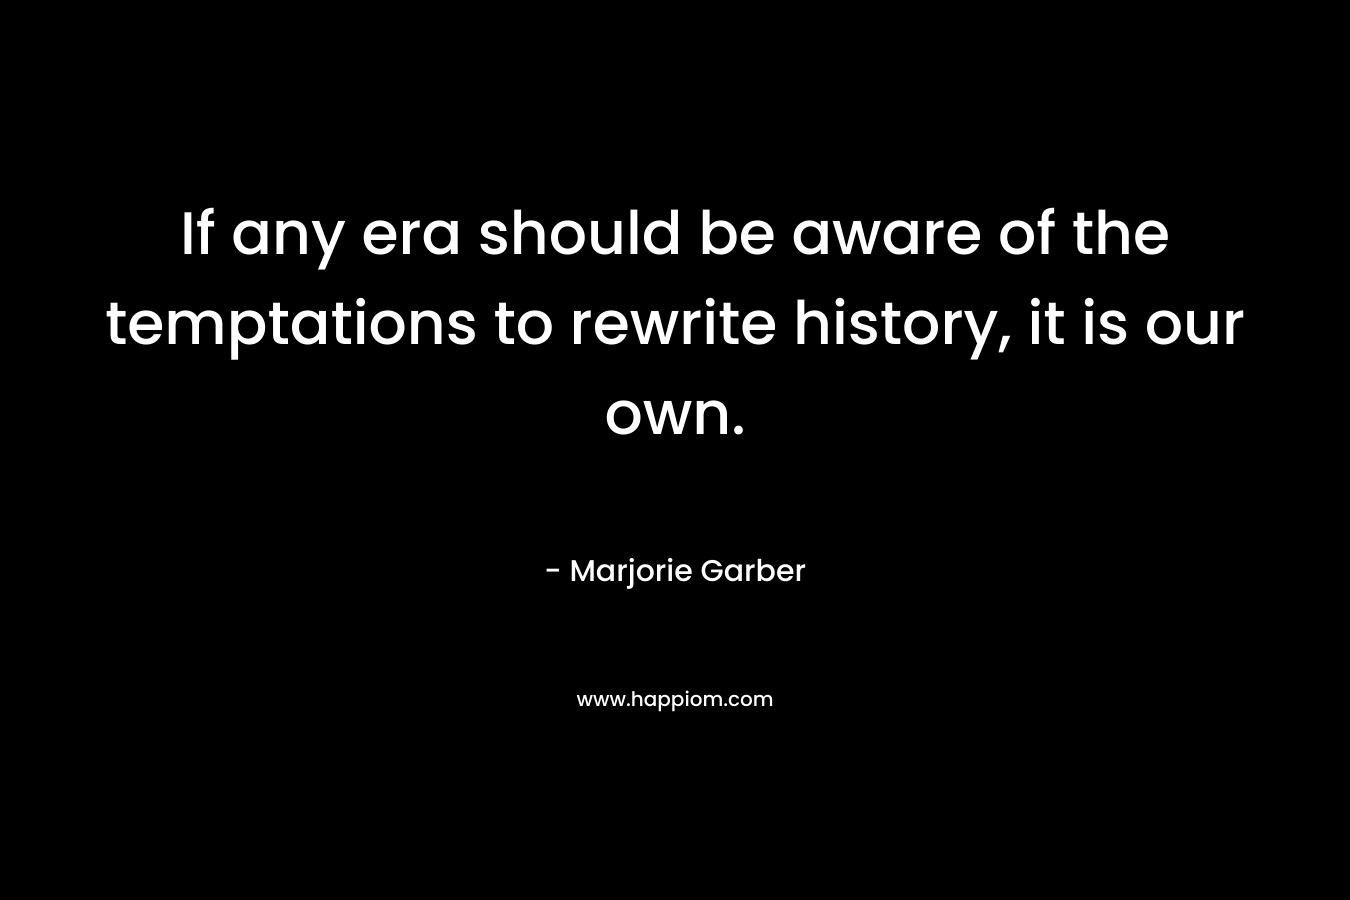 If any era should be aware of the temptations to rewrite history, it is our own. – Marjorie Garber